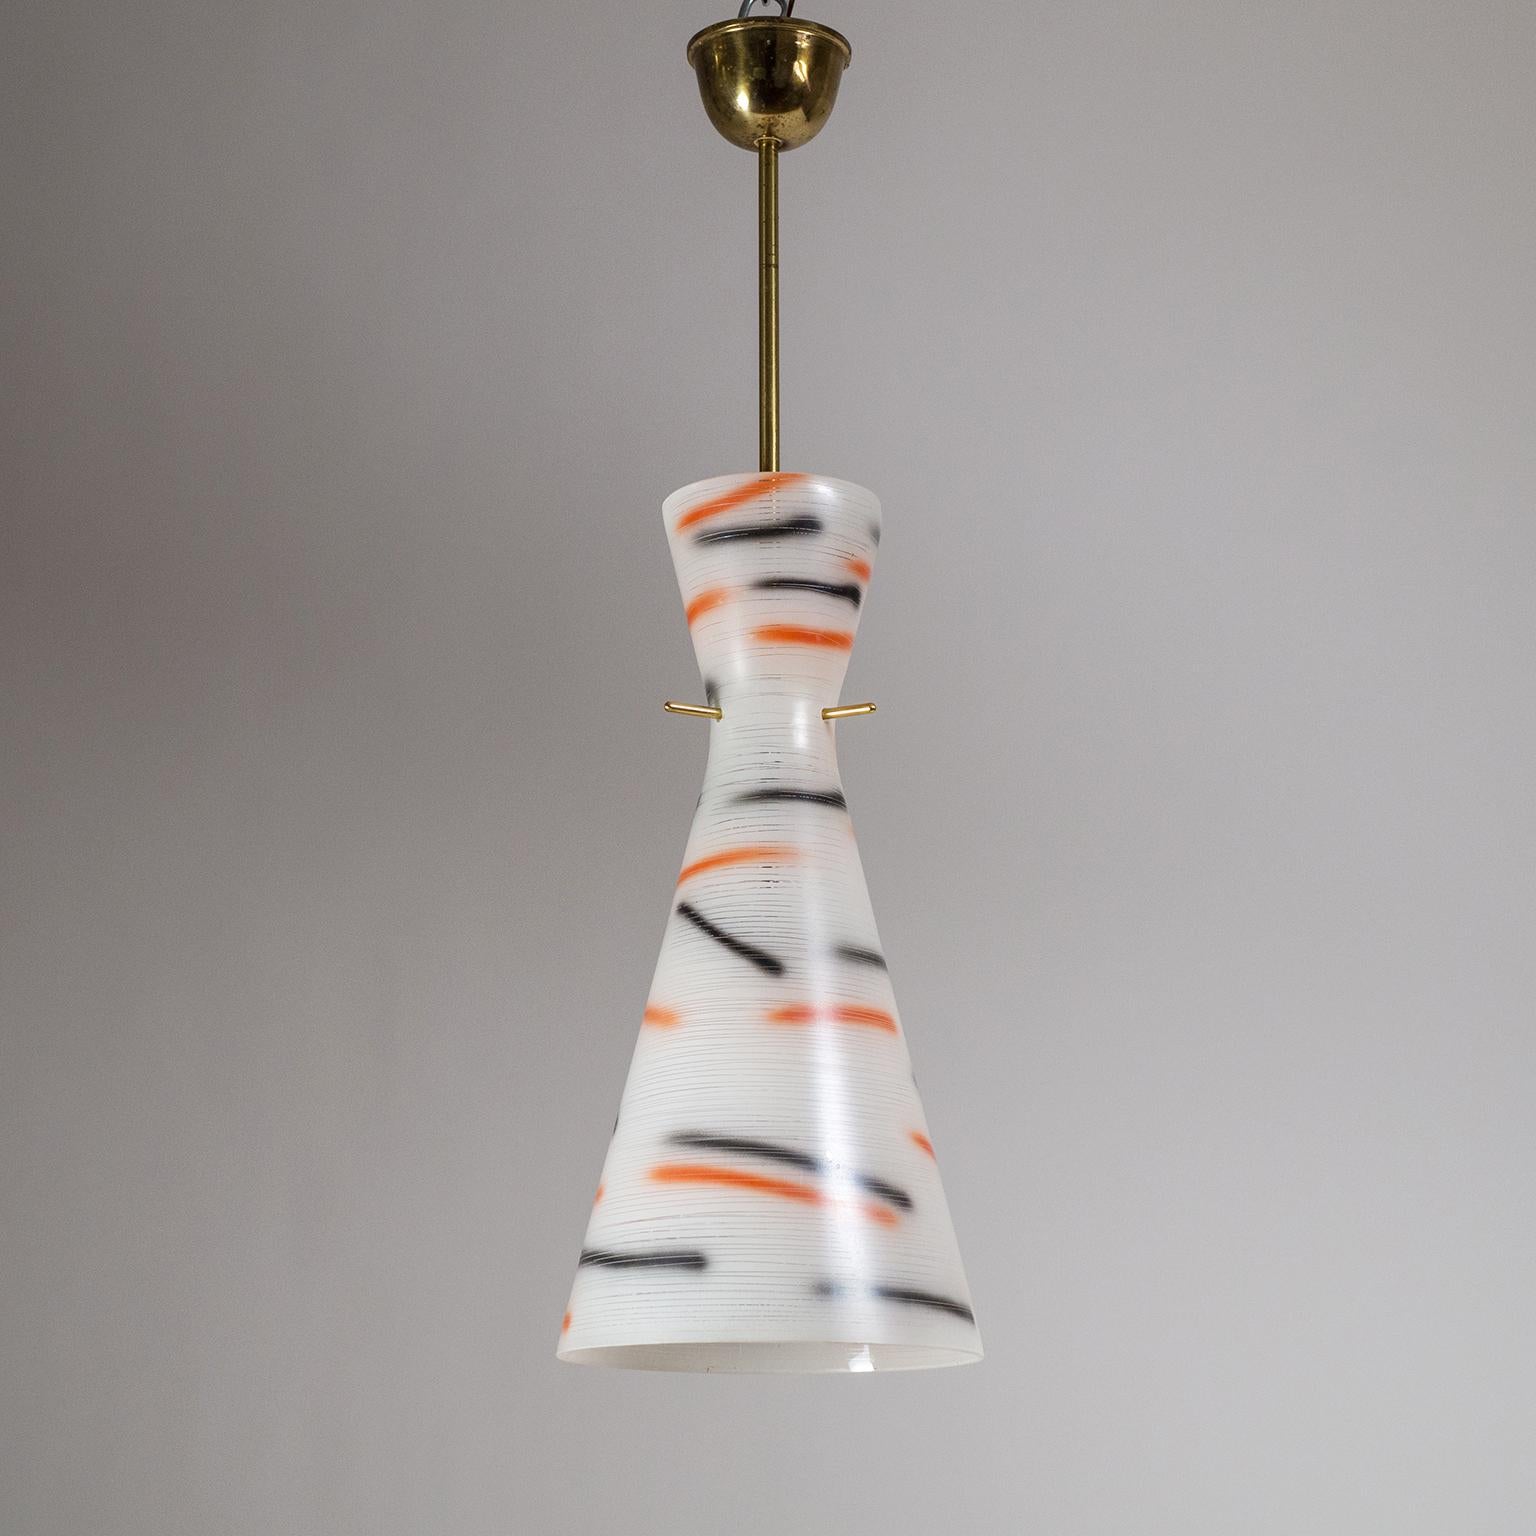 Highly unique and unusual midcentury Italian glass pendant. The large double cone glass diffuser is enameled in white with red and black sprayed streaks and has fine spiraling incisions, a very bold and gestural Avant Garde design. Good original